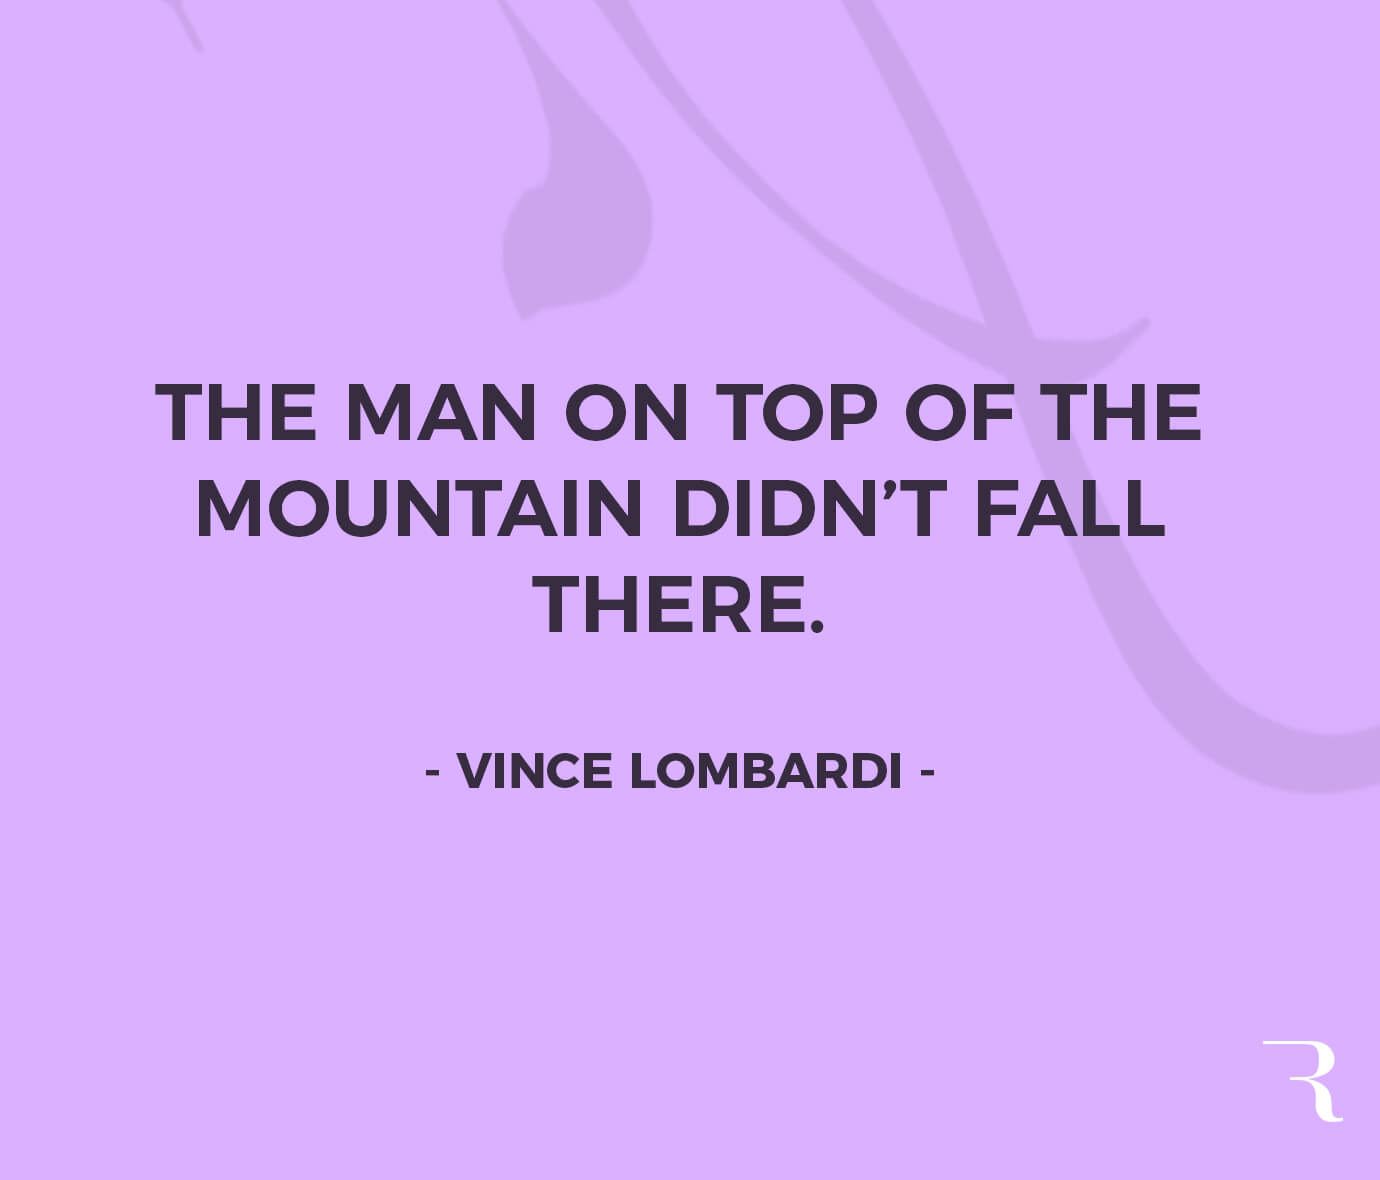 Motivational Quotes: “The man on top of the mountain didn’t fall there.” 112 Motivational Quotes to Be a Better Entrepreneur